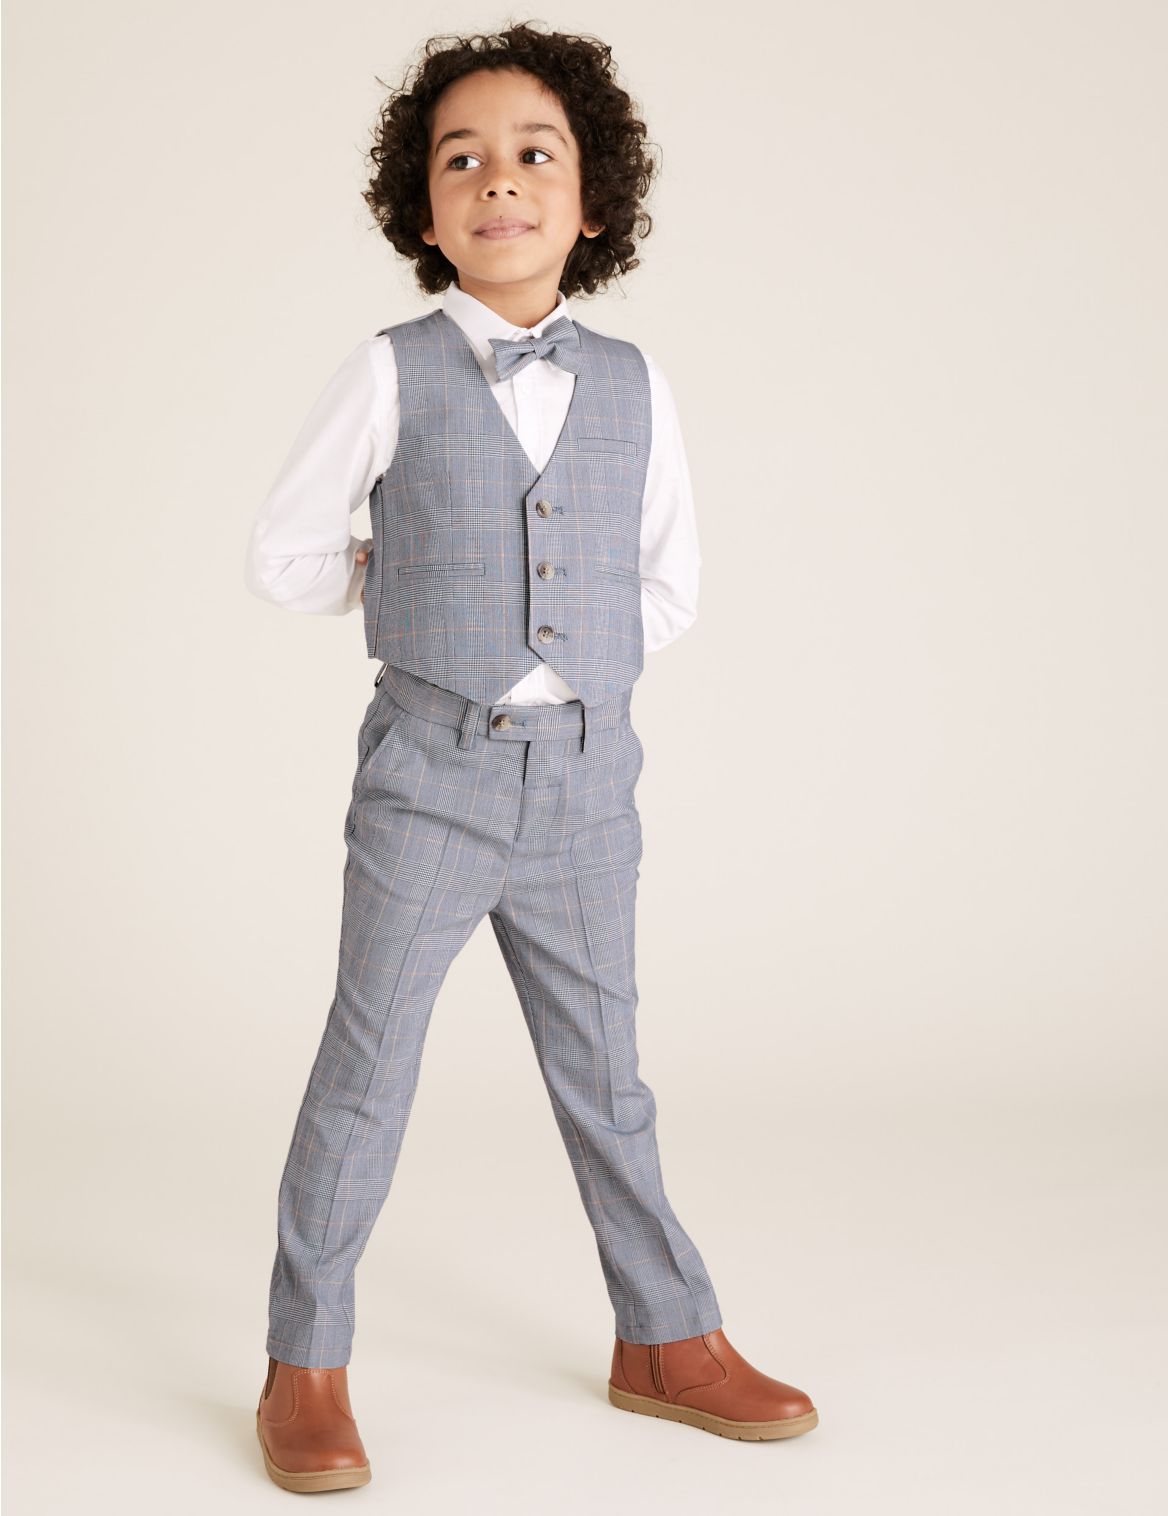 4 Piece Checked Suit Outfit (2-7 Yrs) blue